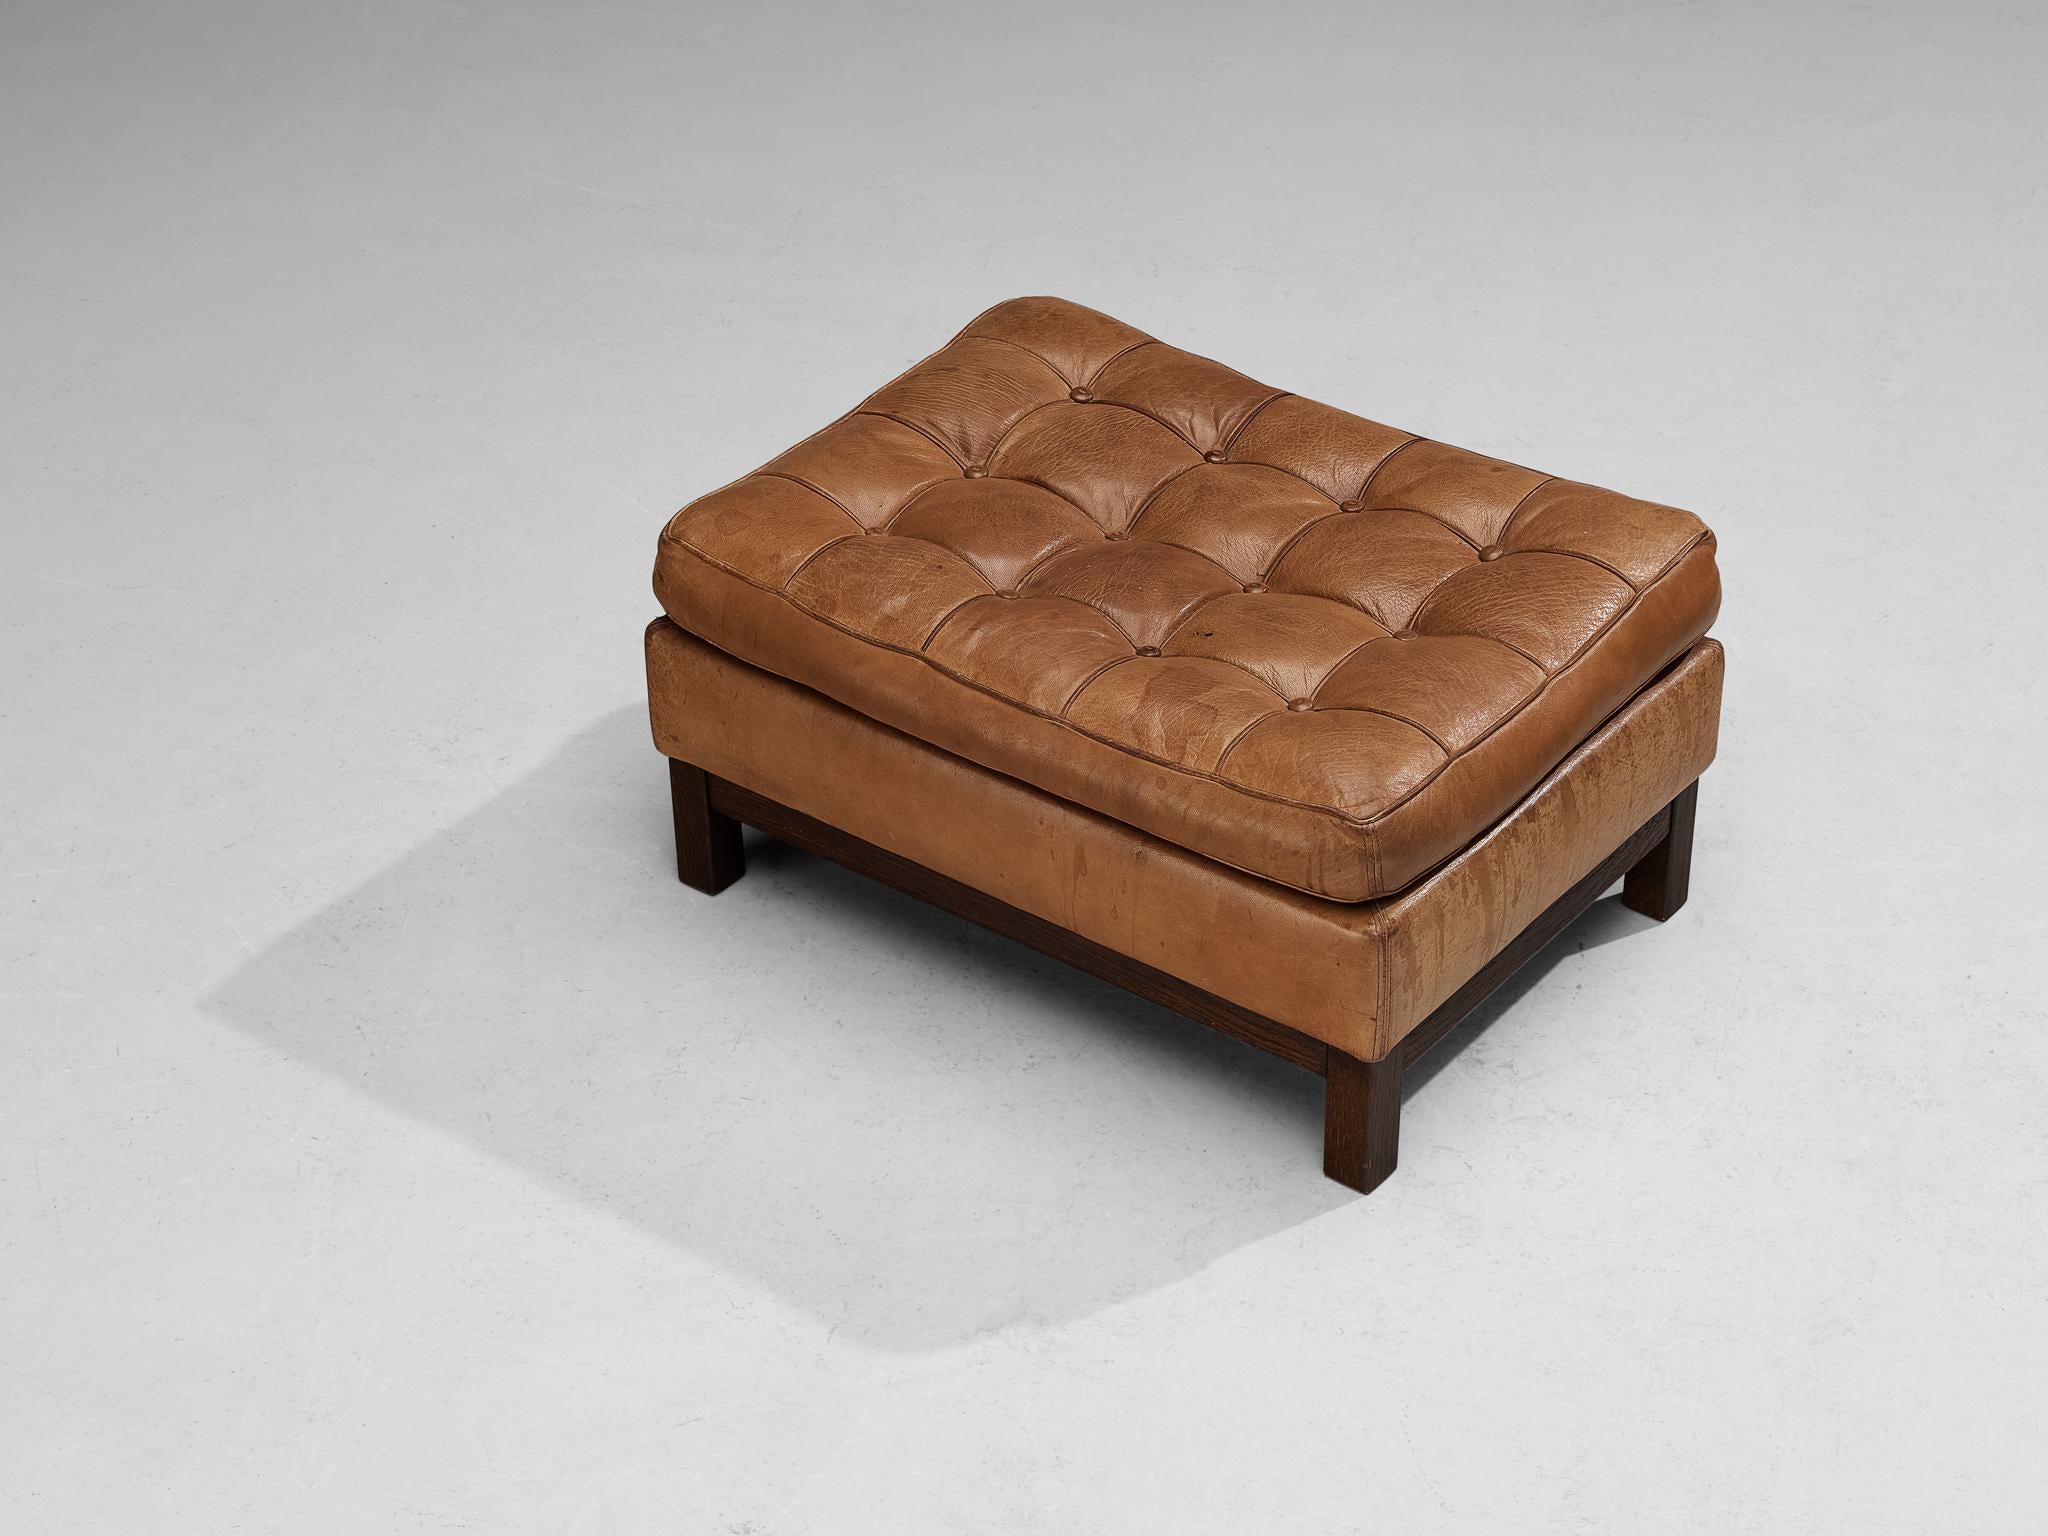 Arne Norell for Norell AB, 'Merkur' ottoman, leather, oak, Sweden, 1960s

This rectangular shaped ottoman by Arne Norell features a comfortable cushion with tufted details. The brown leather features a rhythmic appearance due to the tufted